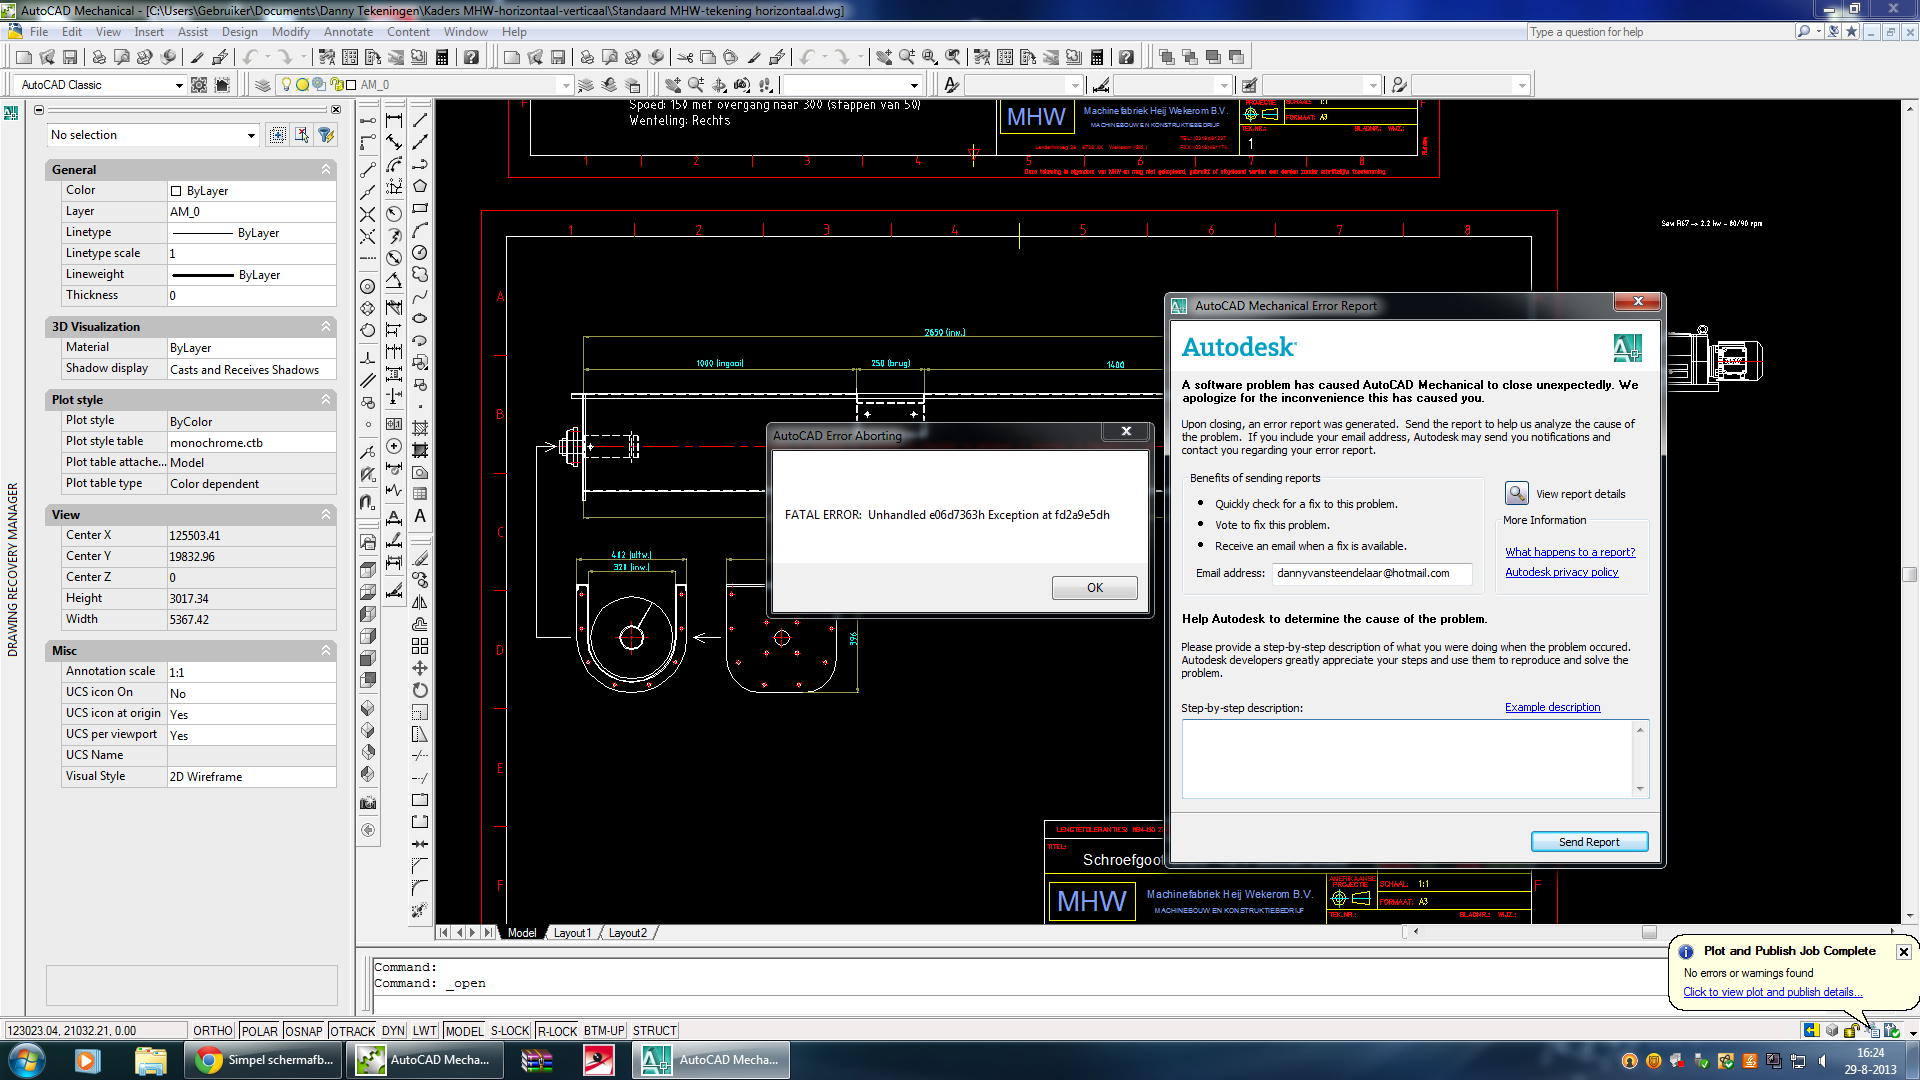 autodesk autocad 2013 command unhandled exception 1